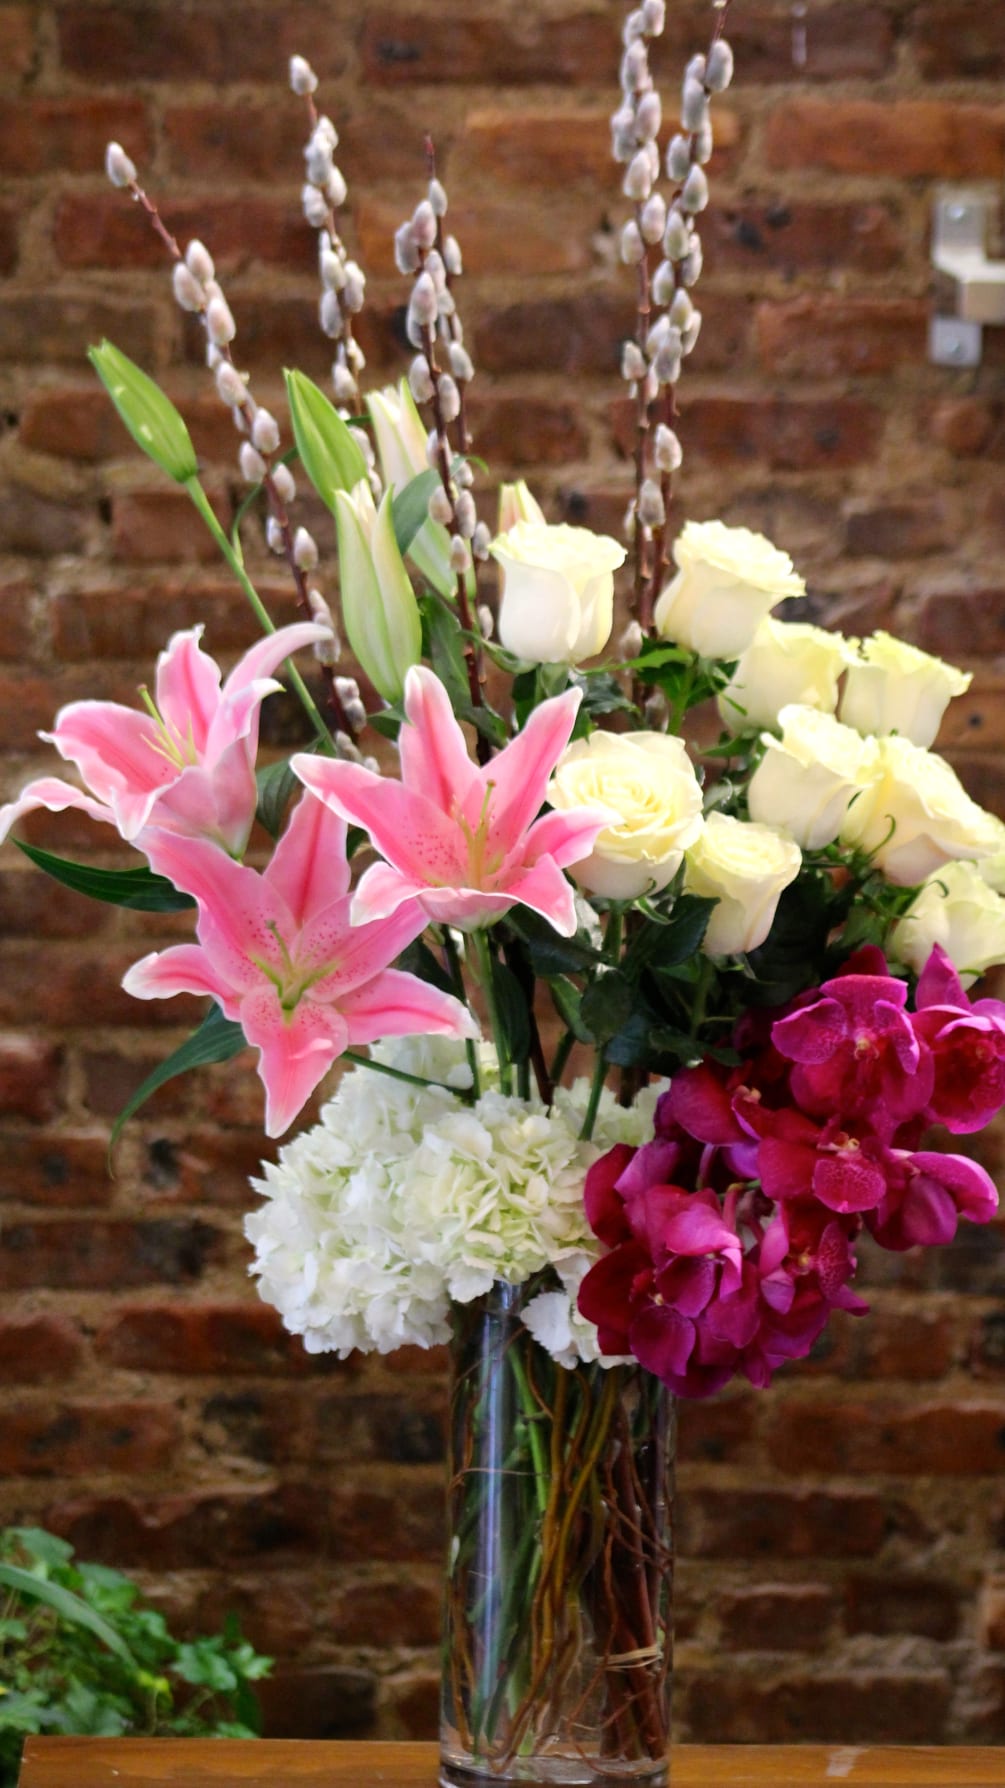 A Modern Styled Arrangement, Designed with Decadent Pink Lilies, Lush White Tibet